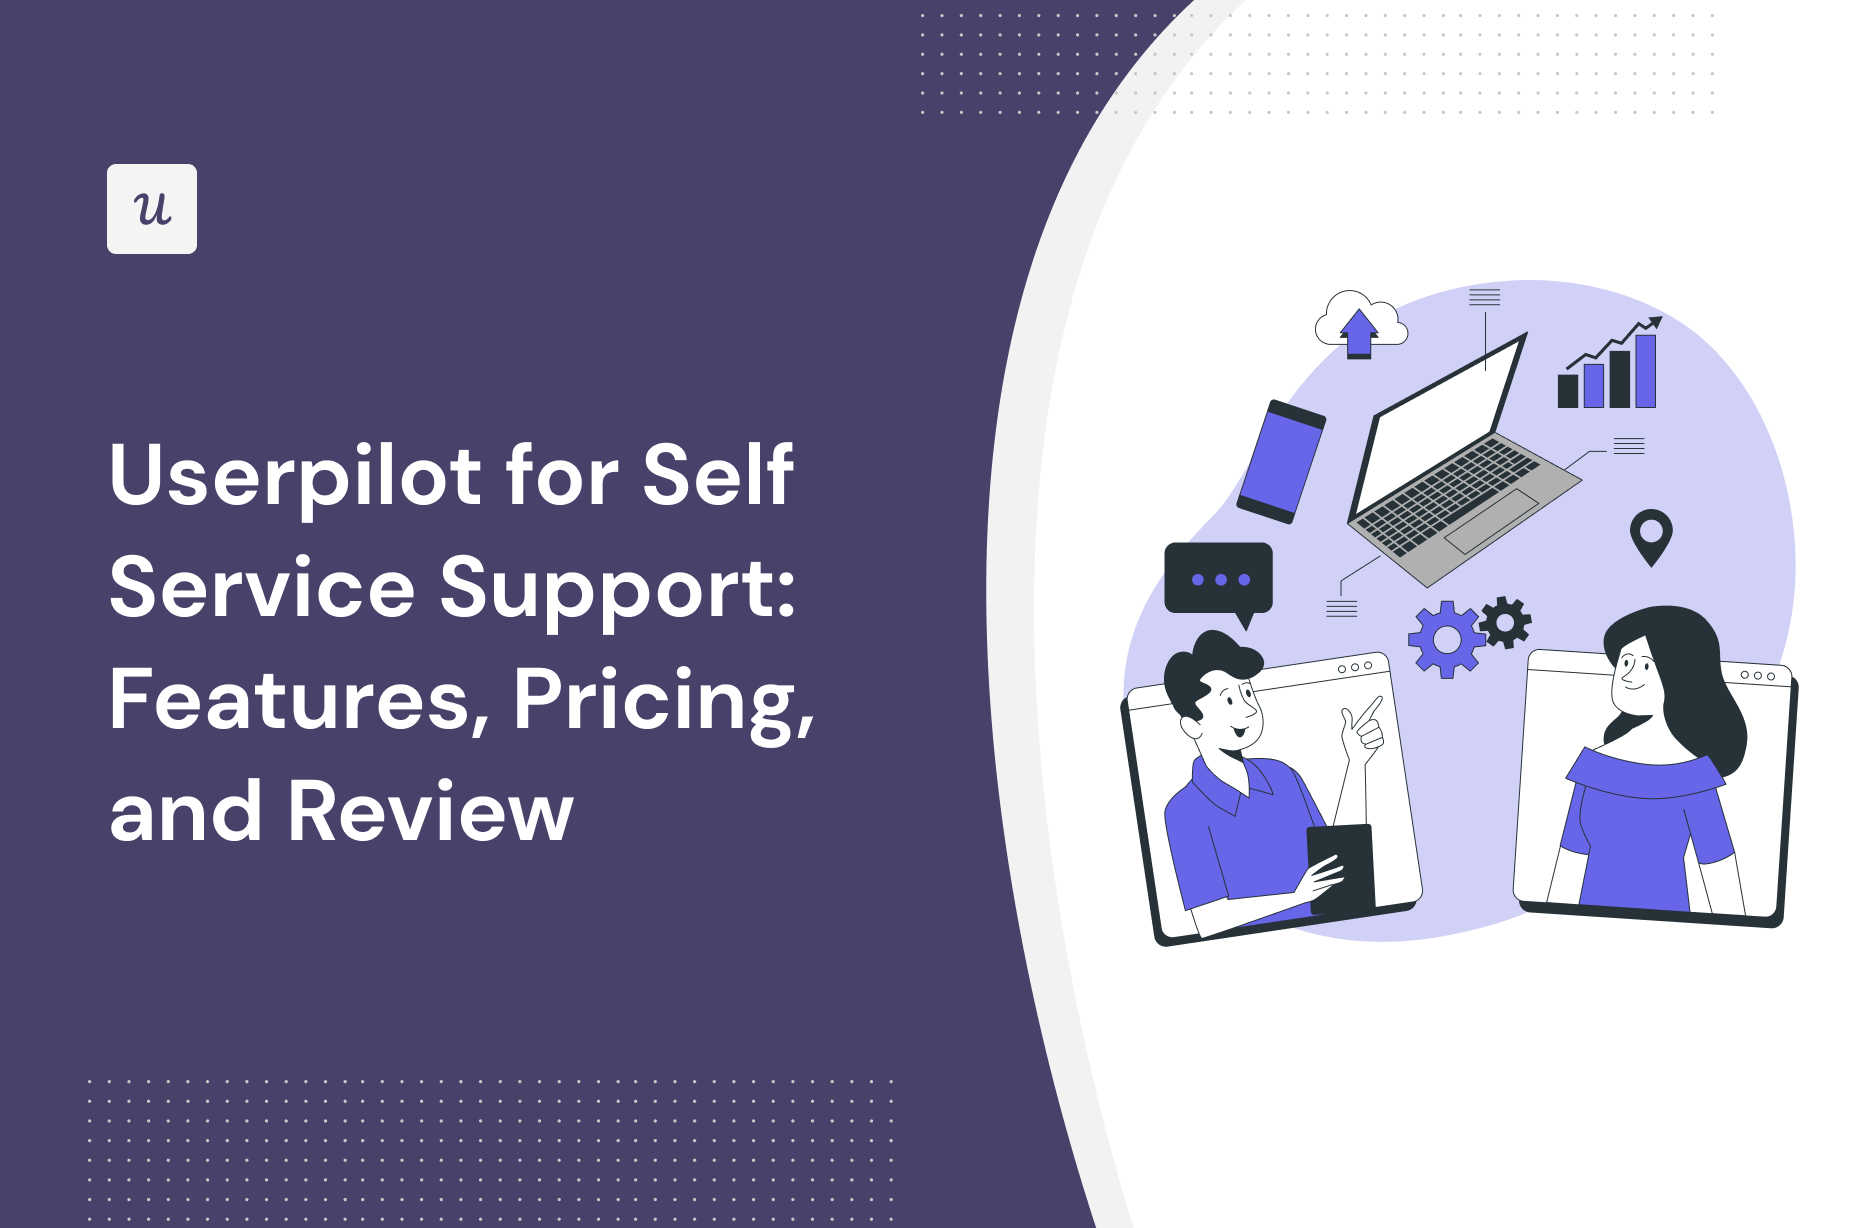 Userpilot for Self Service Support: Features, Pricing, and Review